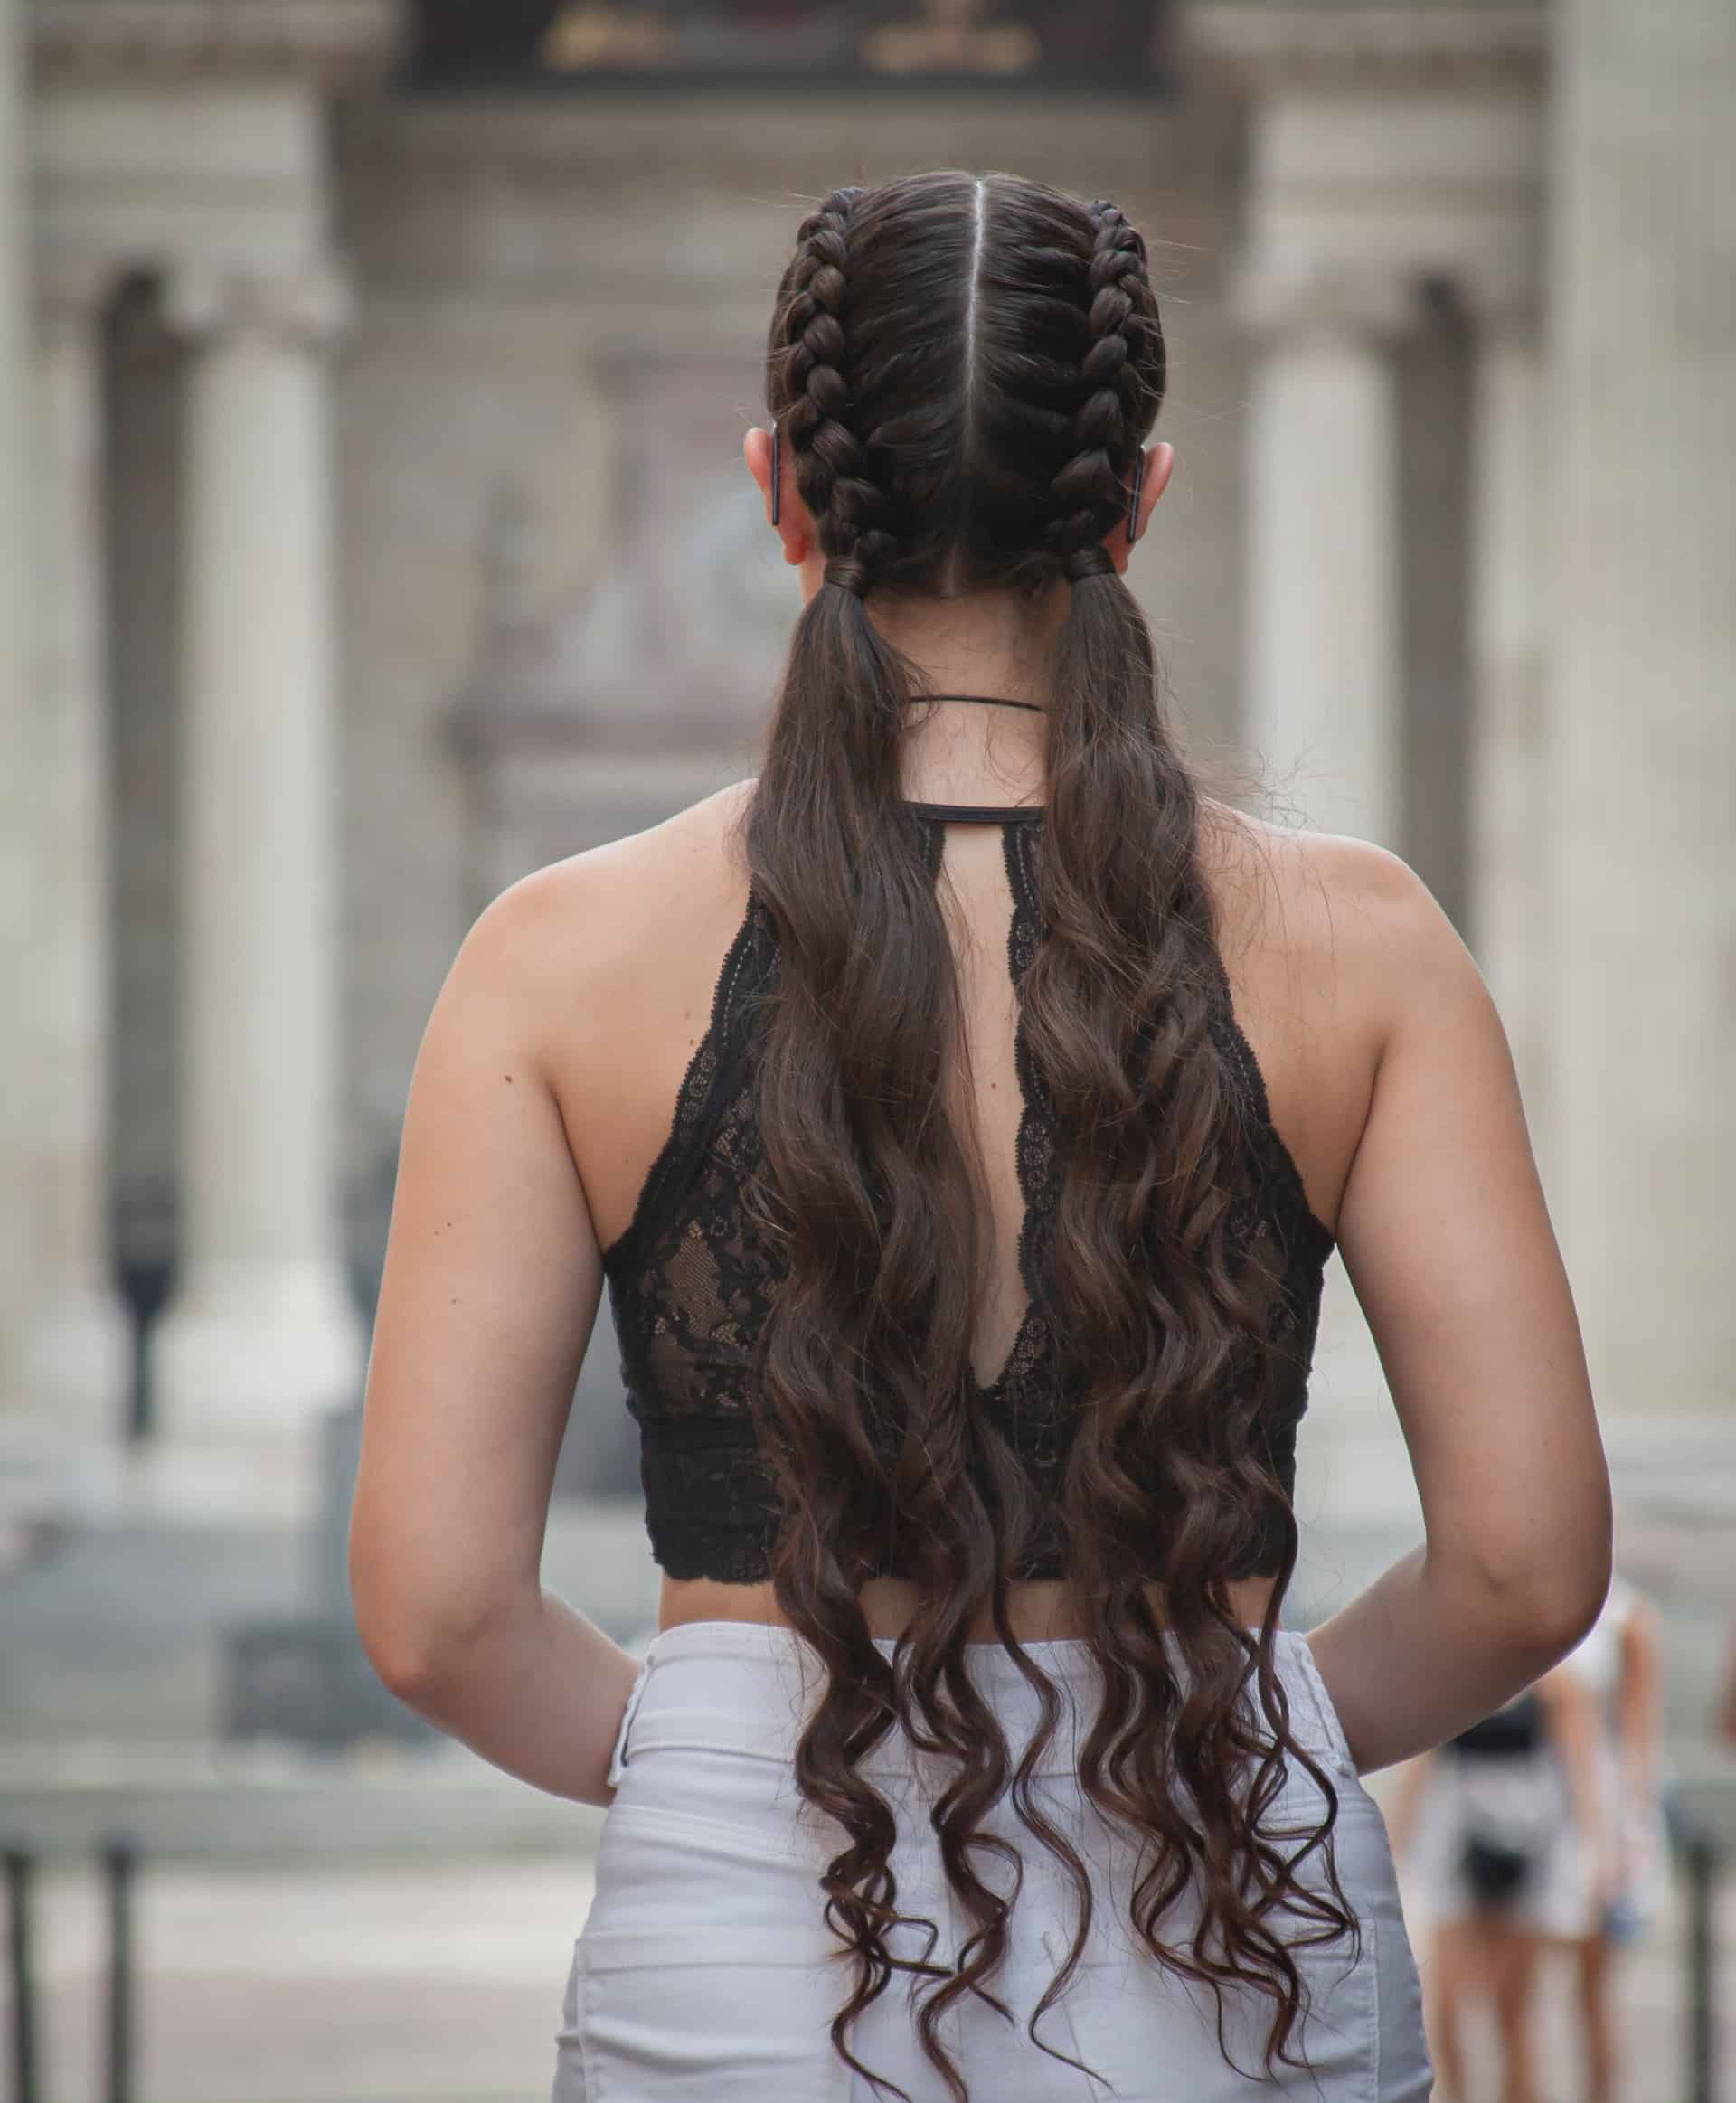 5 Impressive Hairstyles for a Big Event